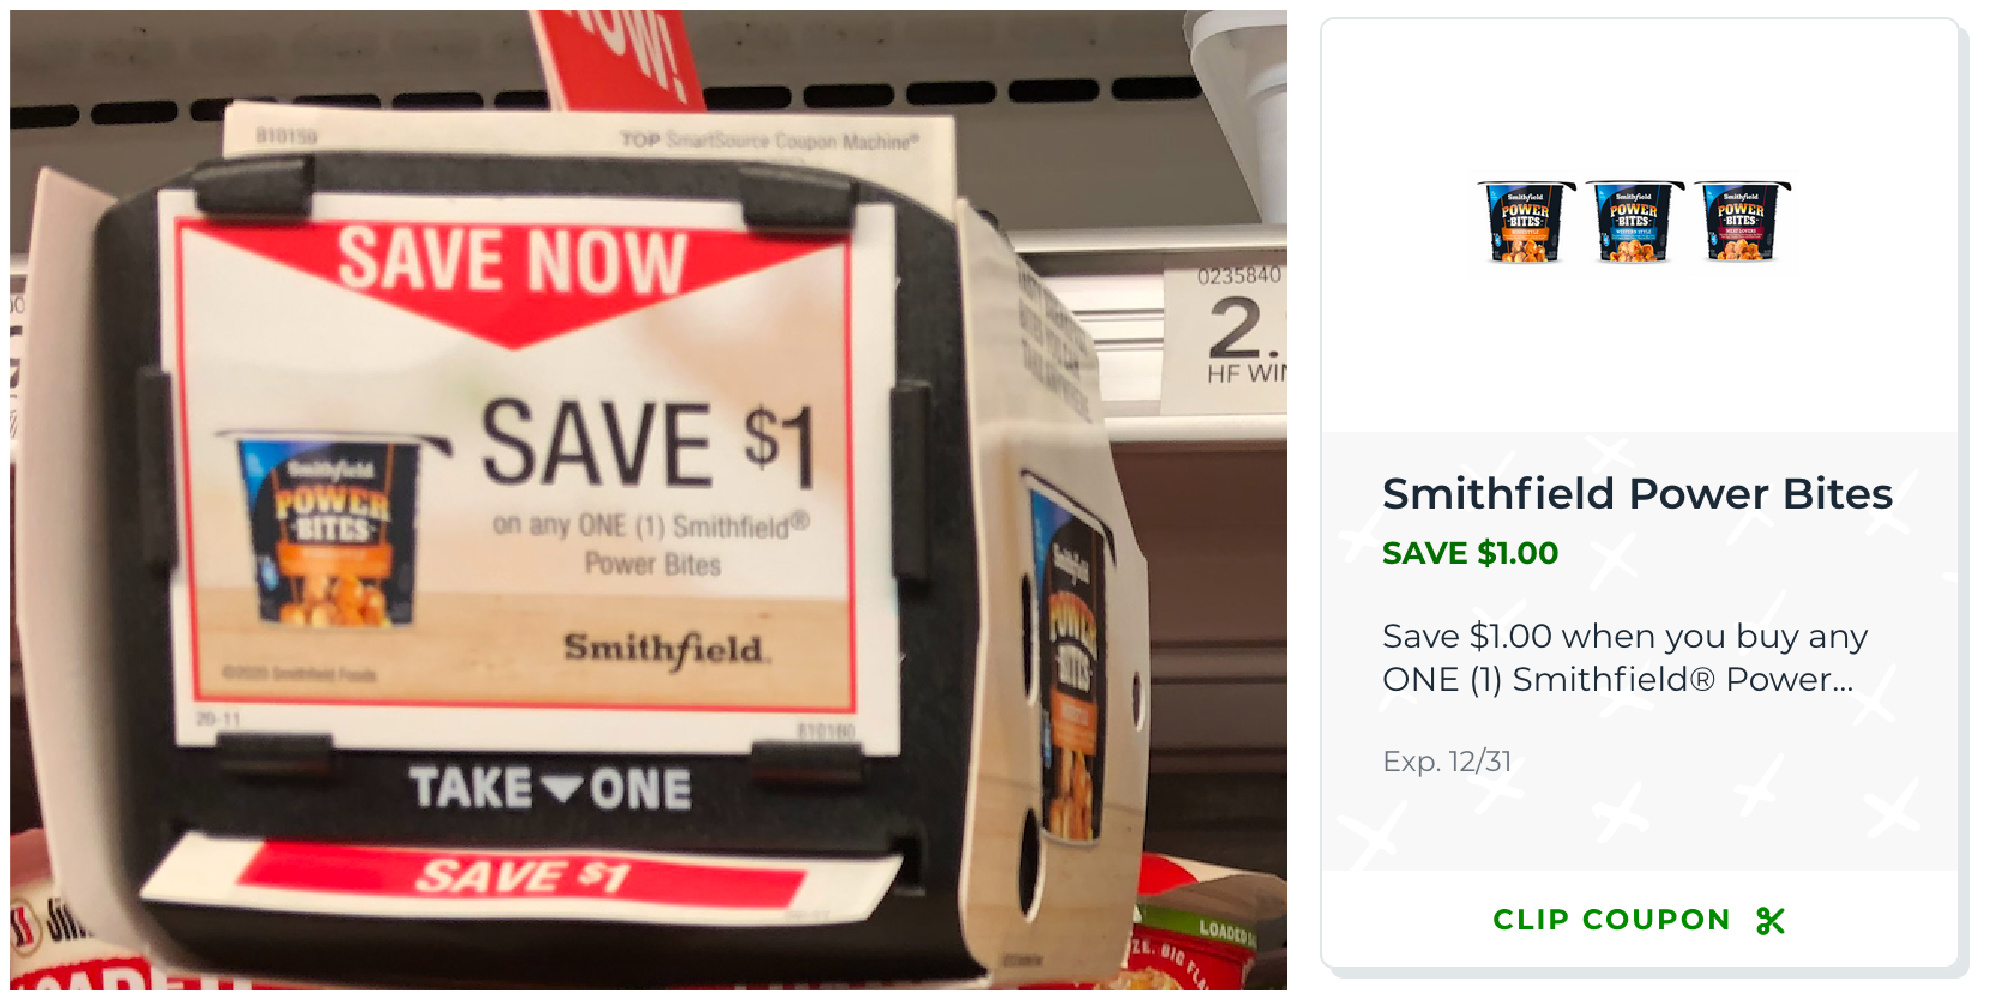 Fantastic Deal On Smithfield Power Bites With The Sale And Coupon Combo - Just $2 At Publix on I Heart Publix